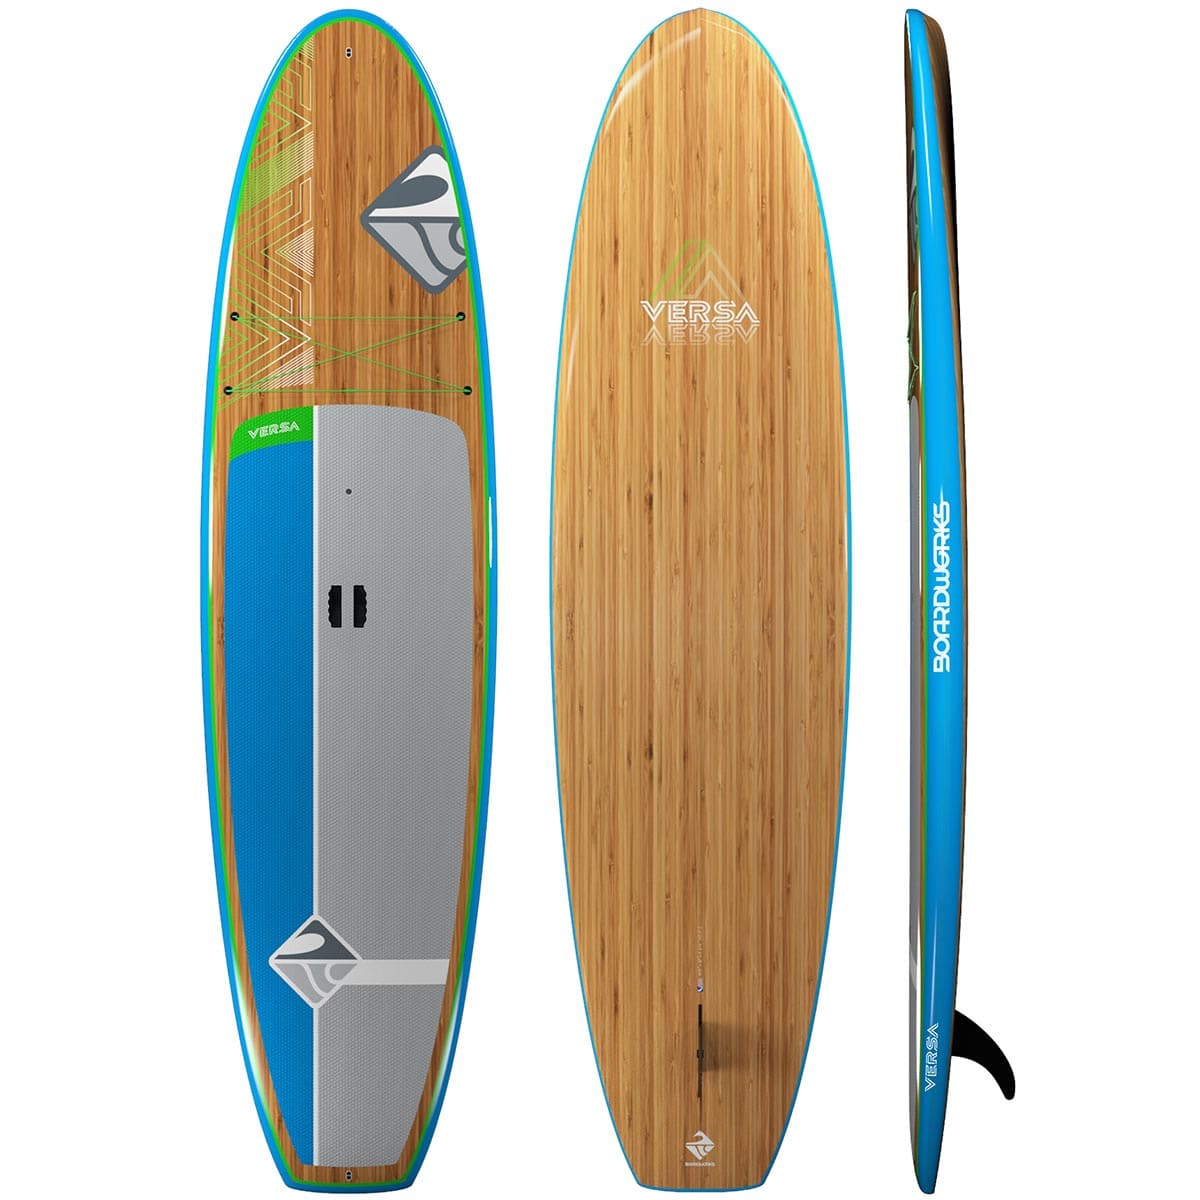 Featuring the Versa 10'6 rigid sup manufactured by Boardworks shown here from a second angle.